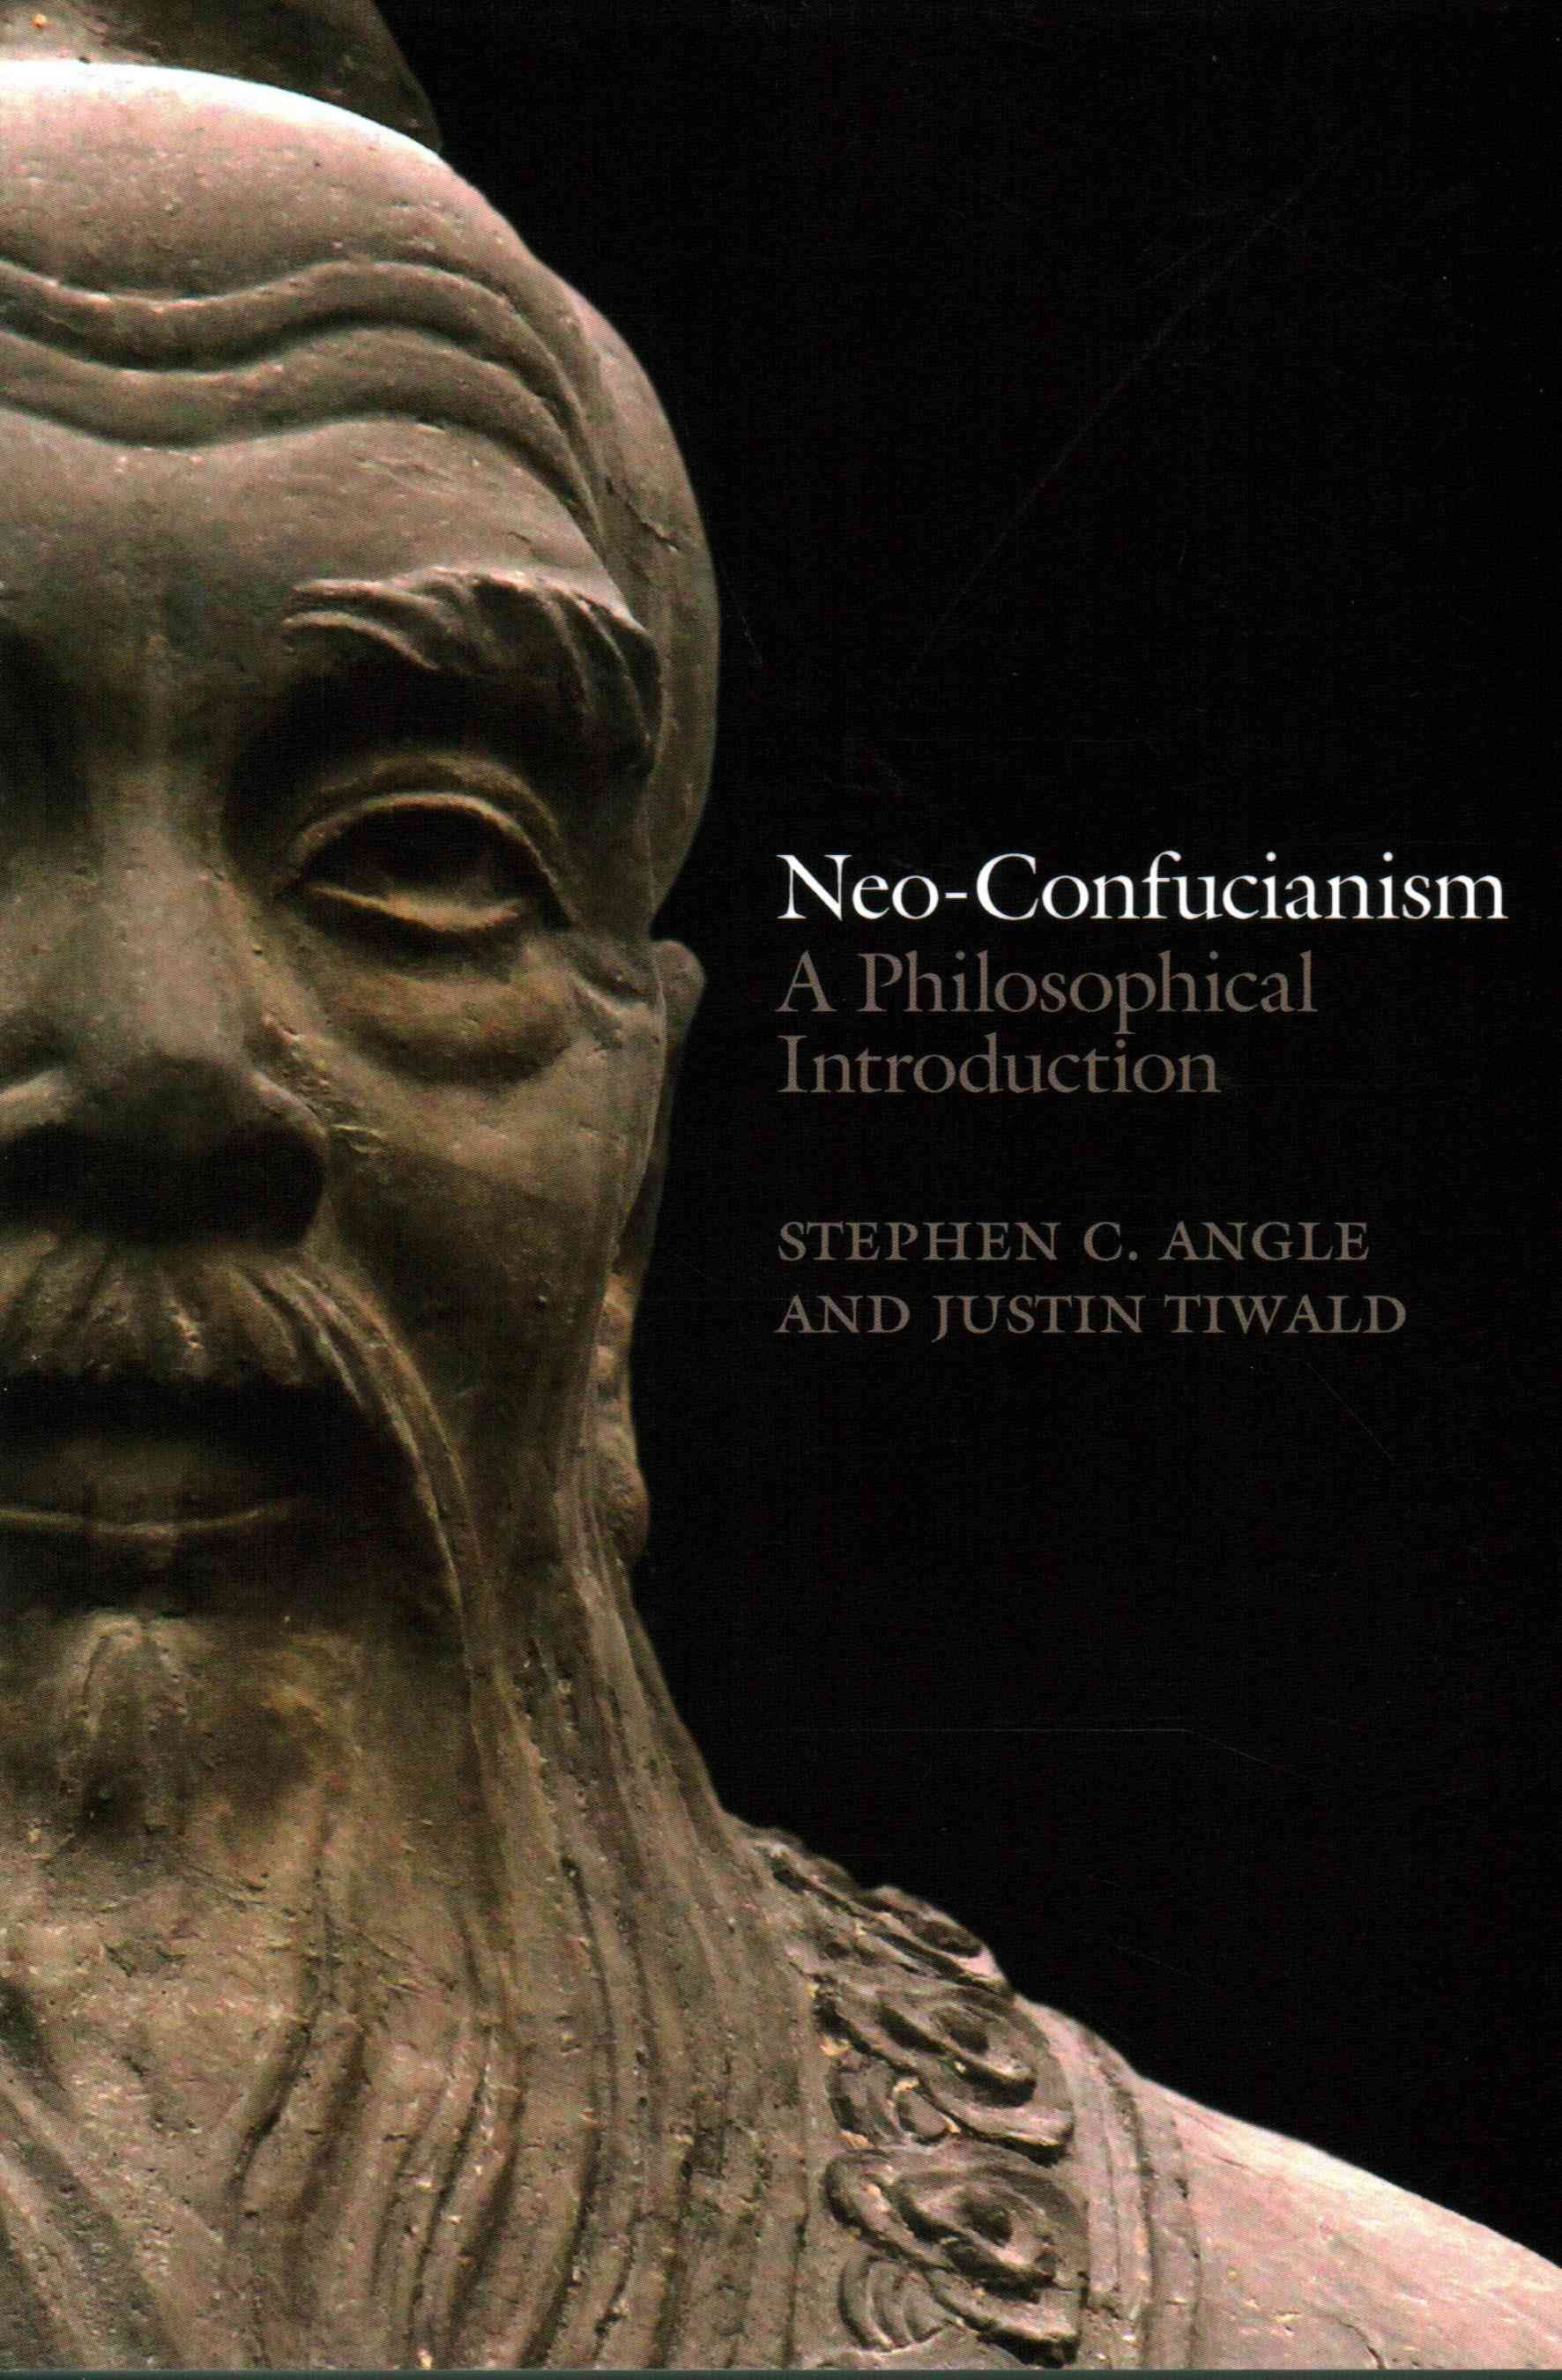 Neo-Confucianism - A Philosophical Introduction